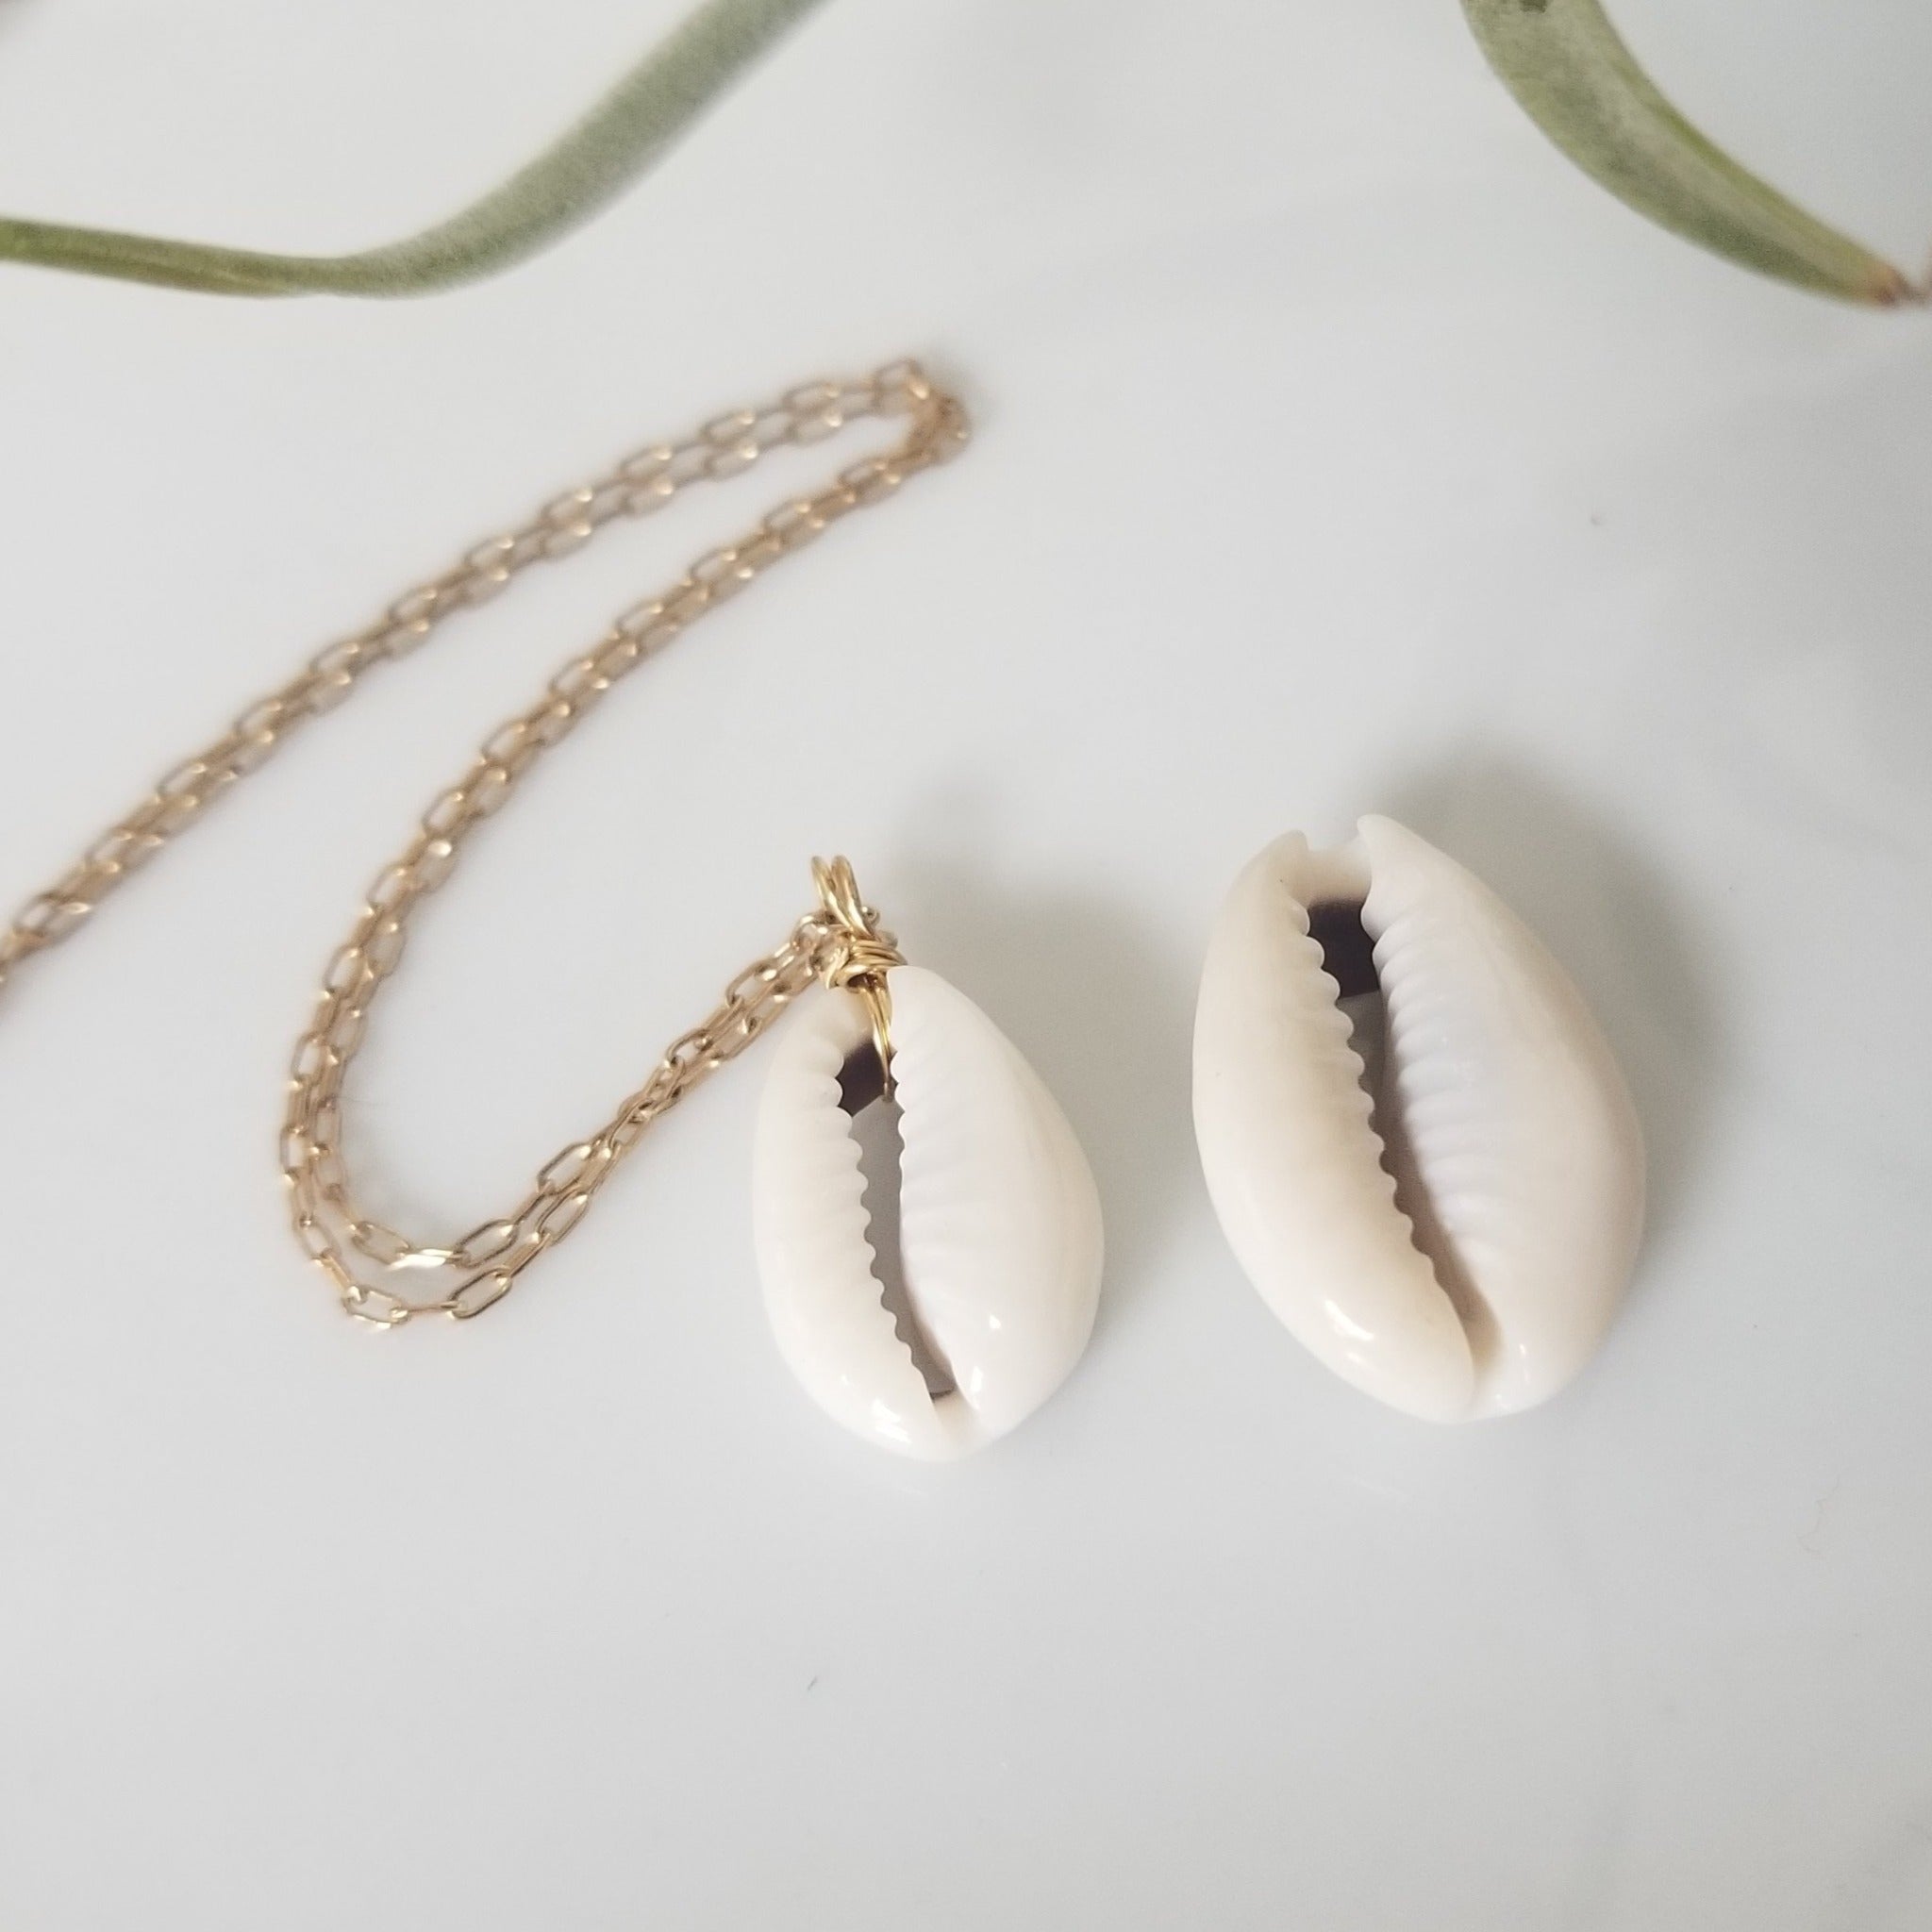 Natural Cowrie Shell Necklace - Small, Med, or Large - Sterling or Gold